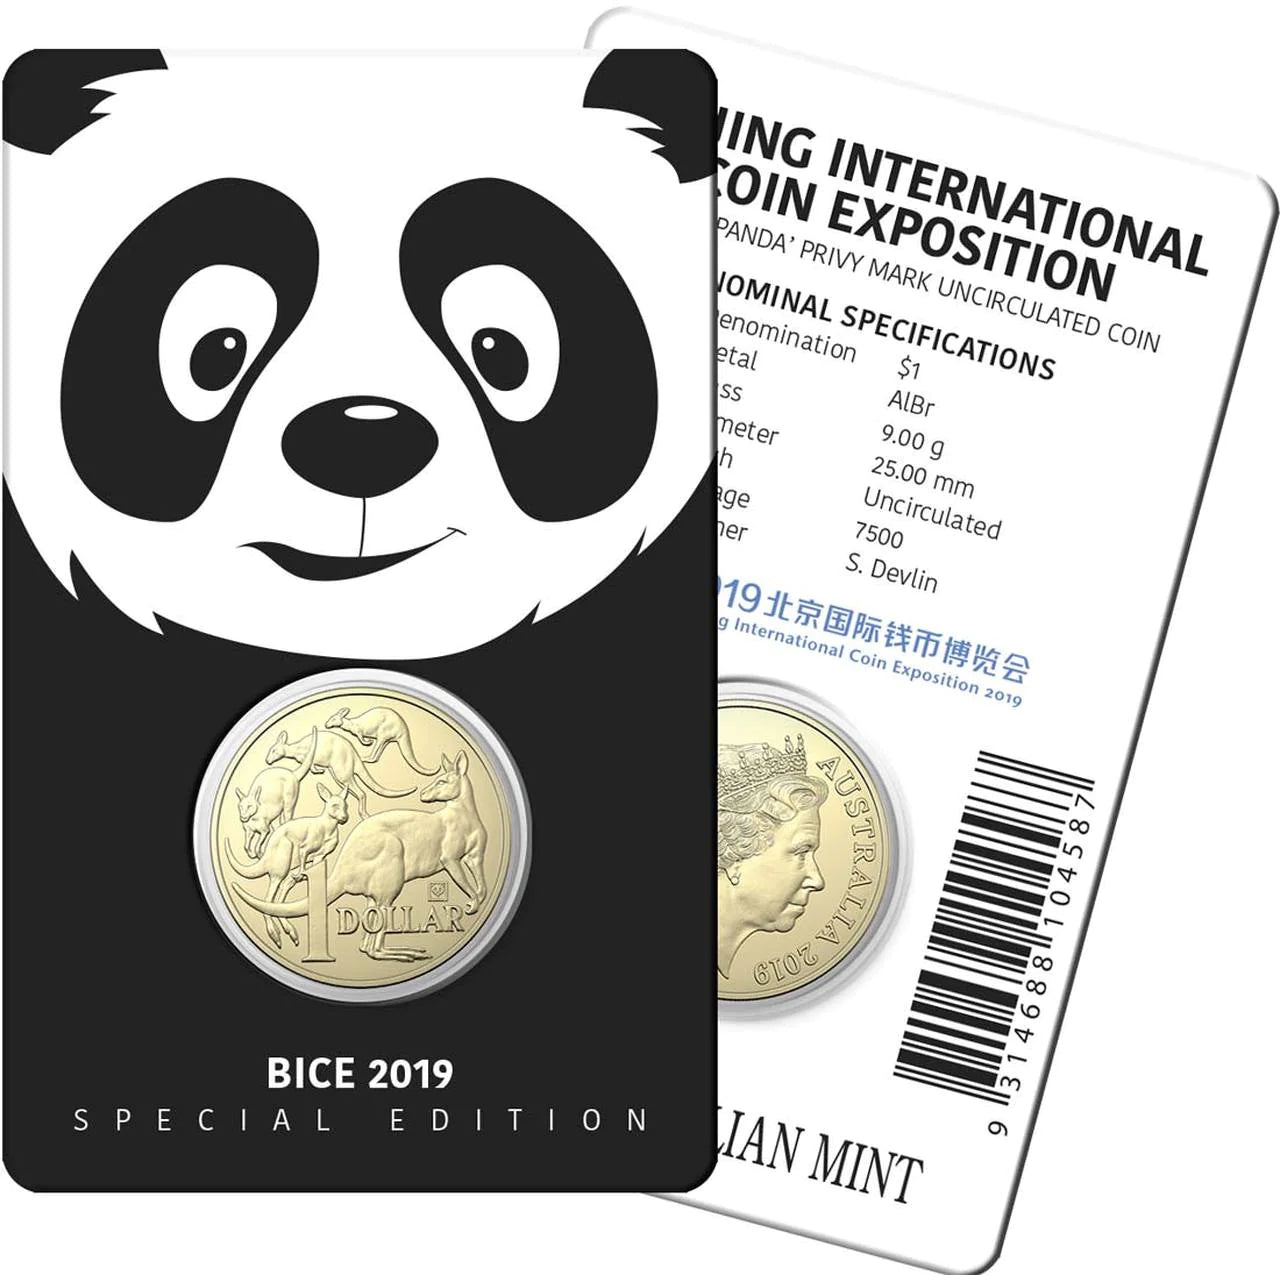 2019 $1 Coin - 'BICE' Mob of Roo's with Panda Privy Mark - Beijing International Coin Exposition